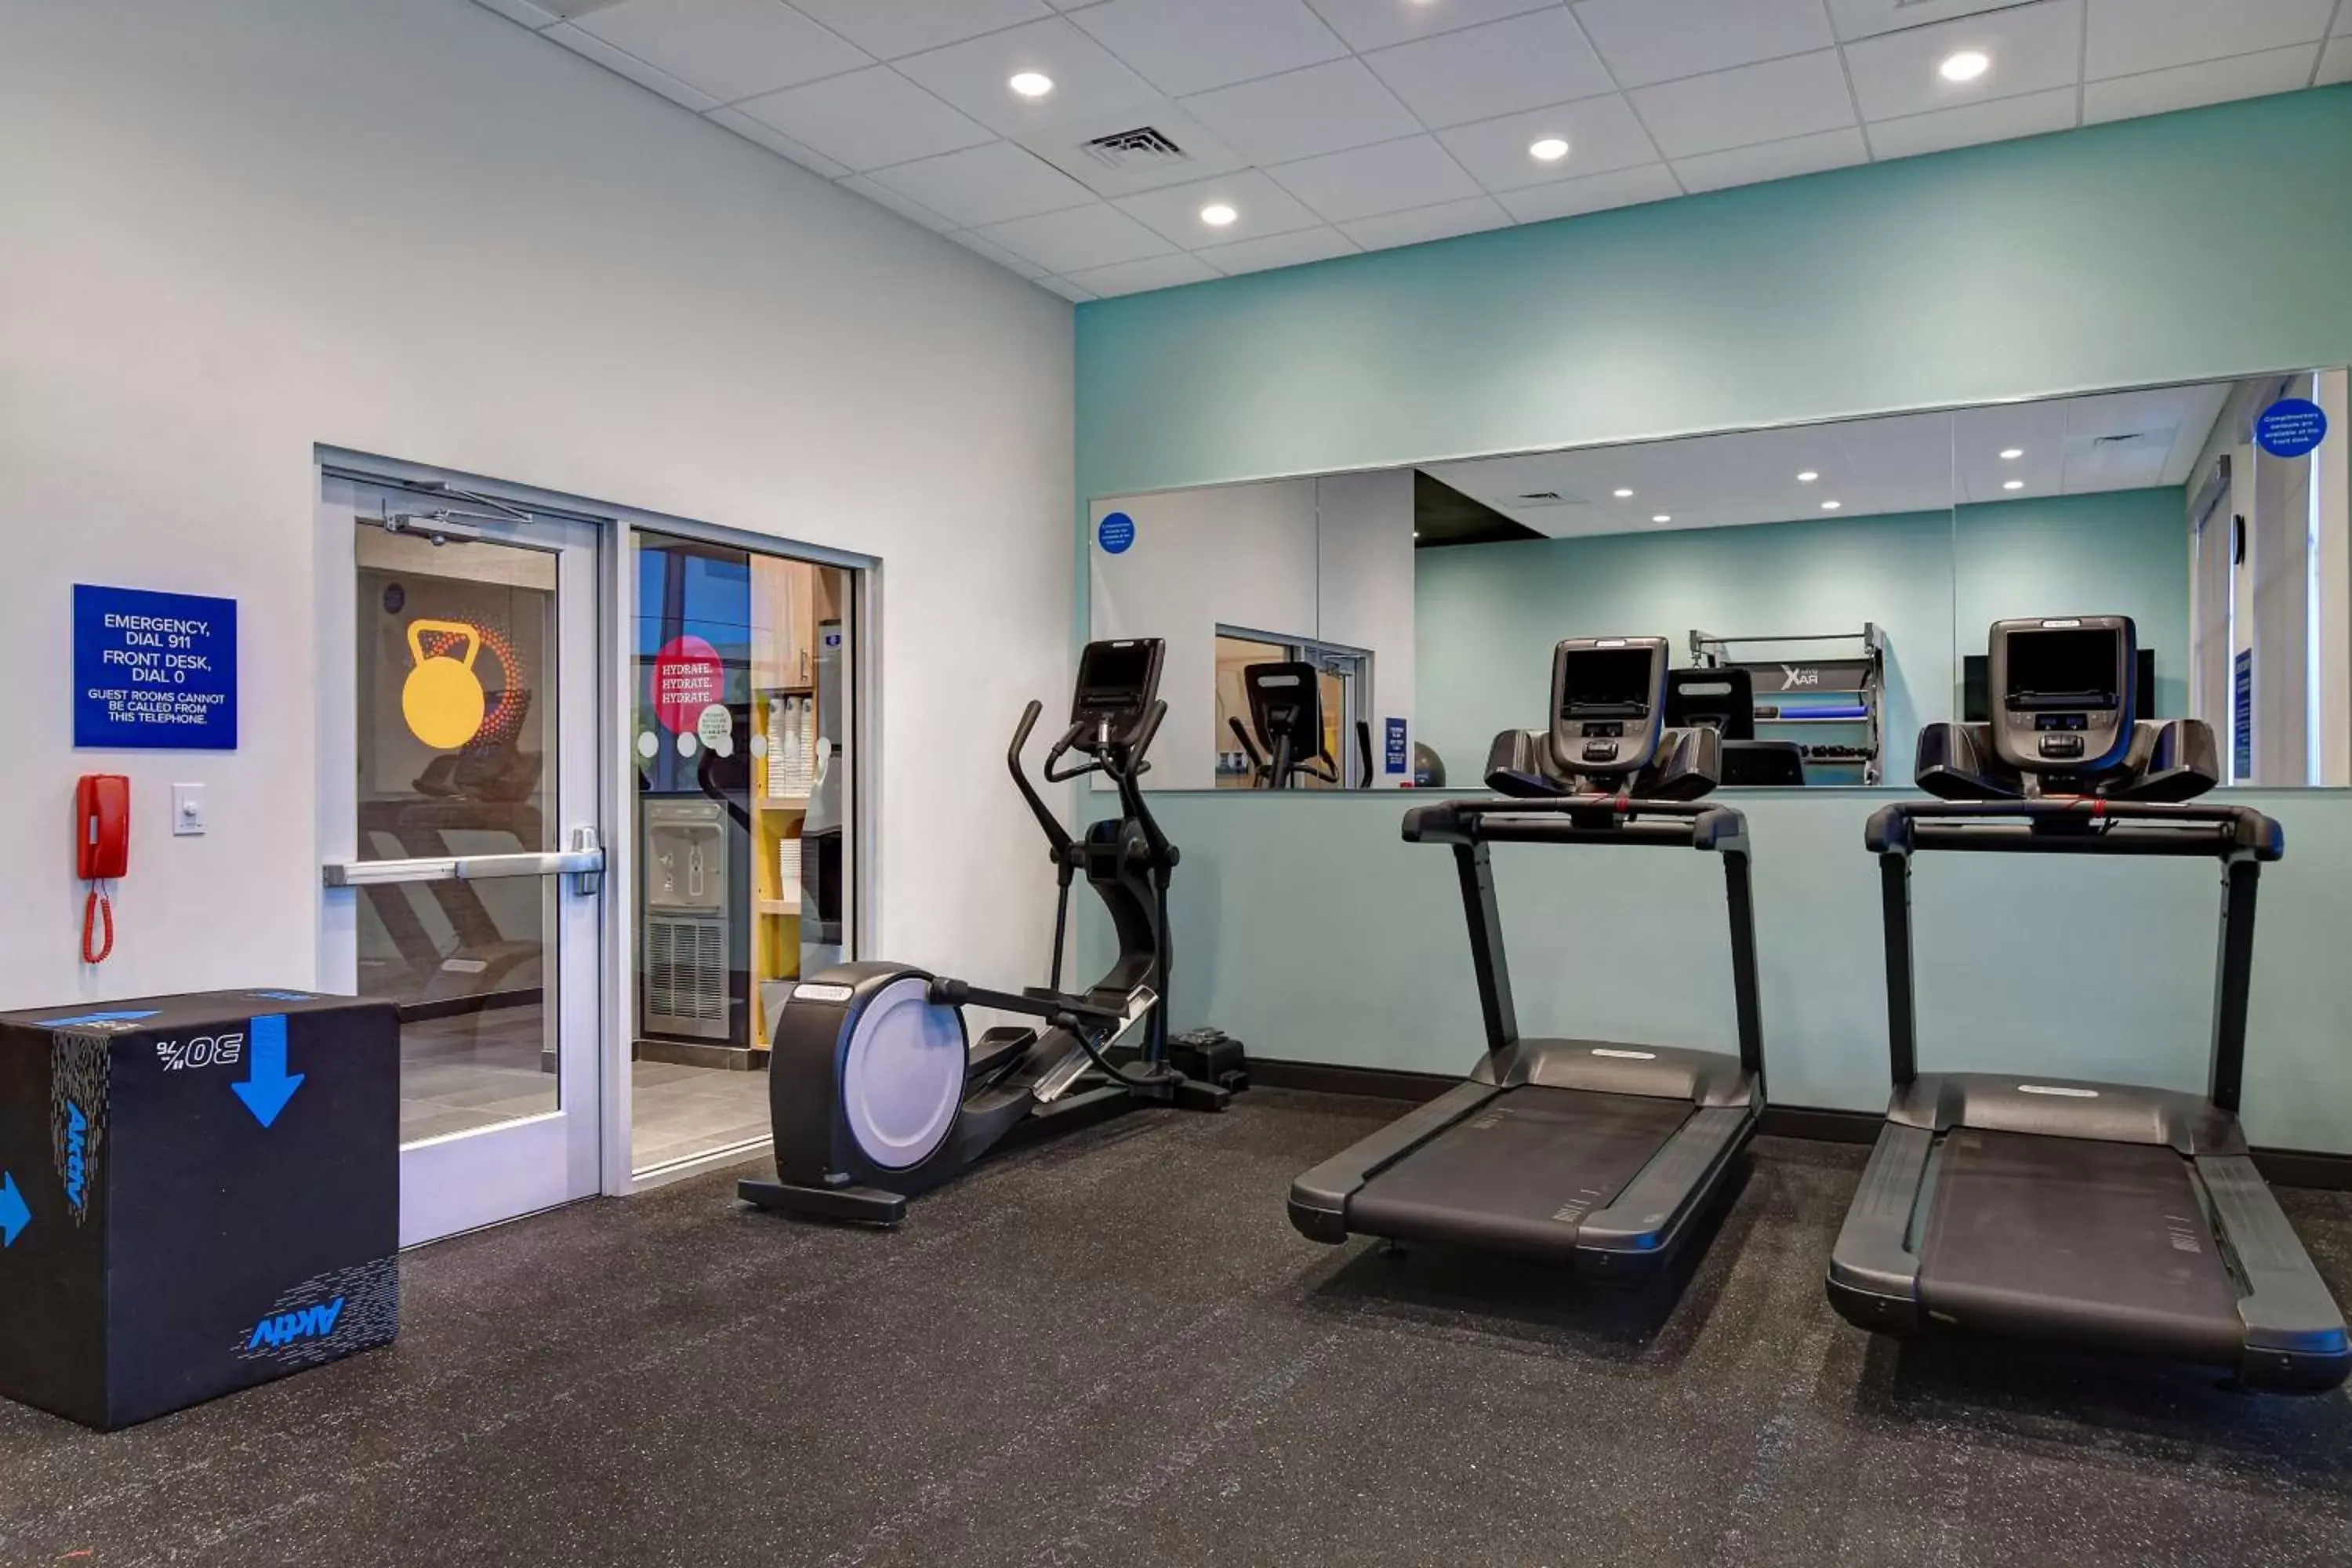 Fitness centre/facilities, Fitness Center/Facilities in Tru By Hilton Rocky Mount, Nc